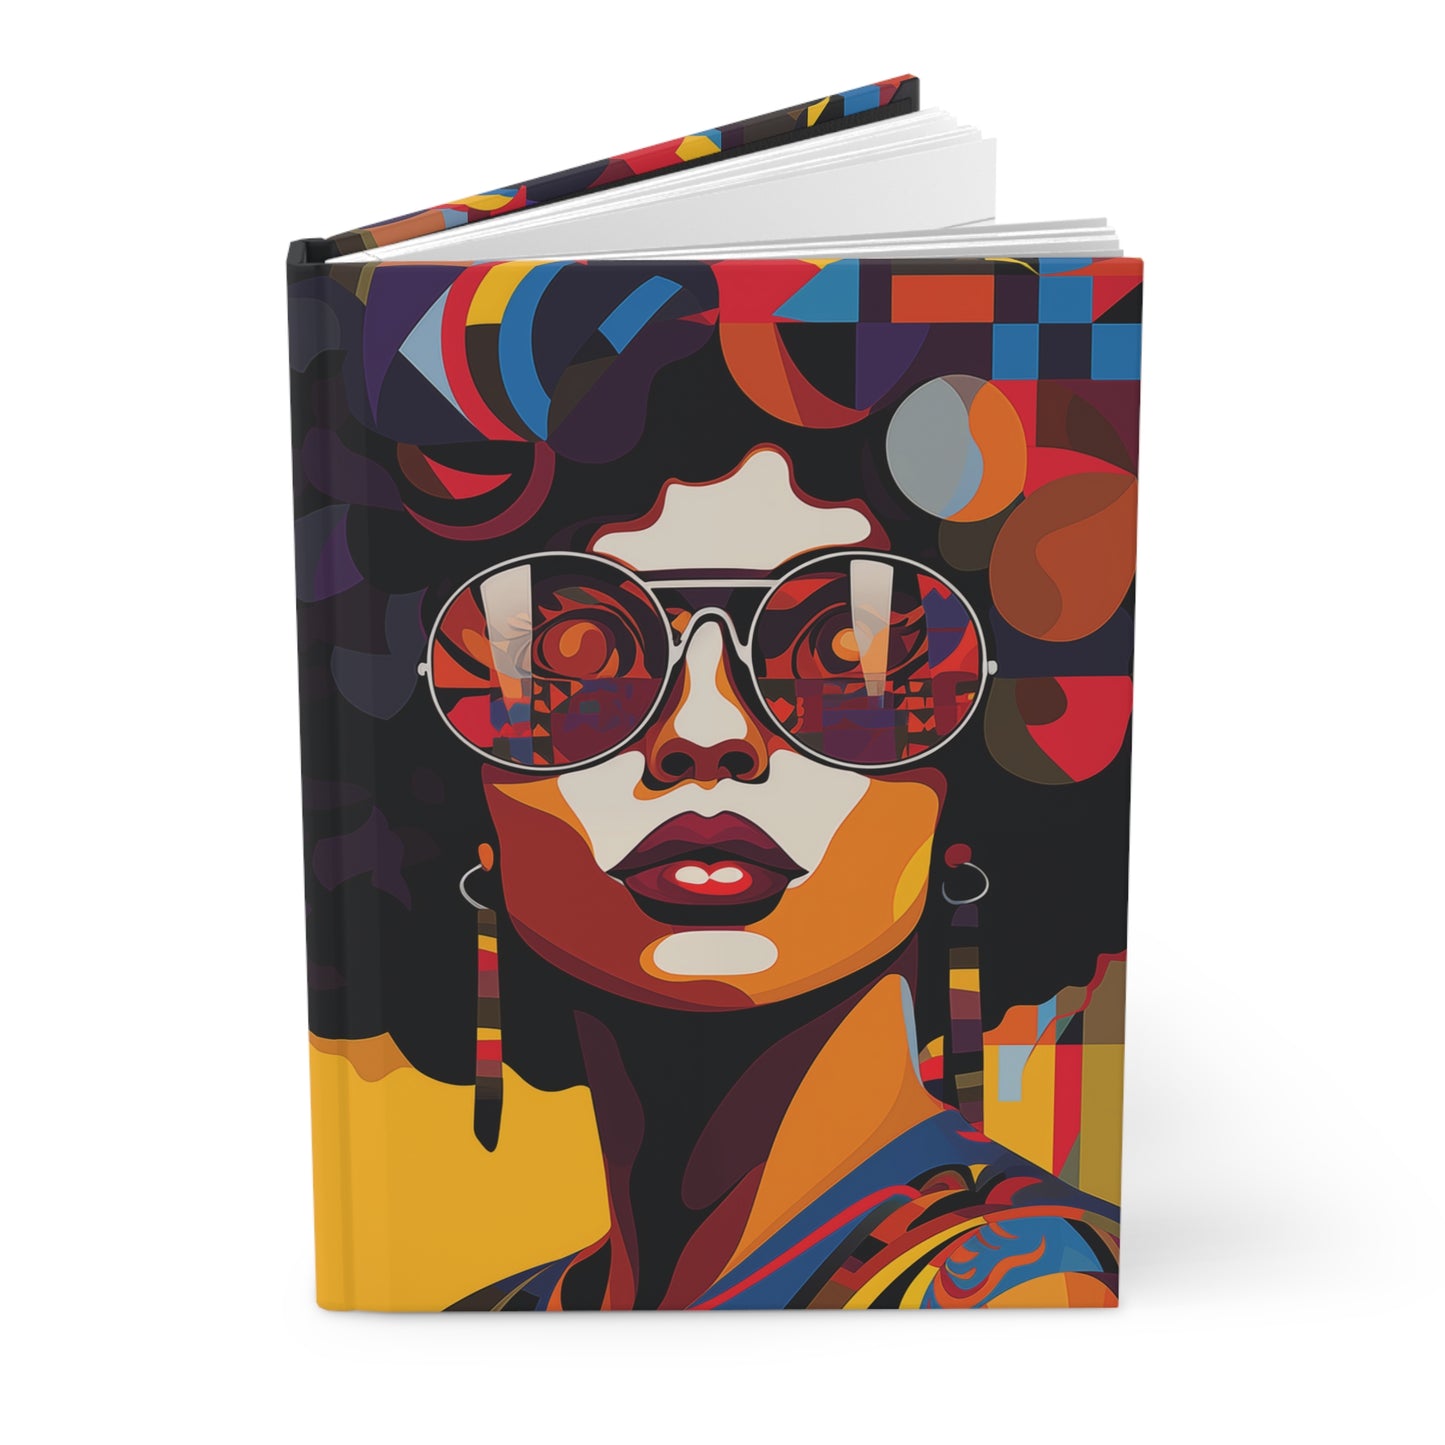 Sassy Shades: Pop Art-Inspired African-American Woman Hardcover Journal